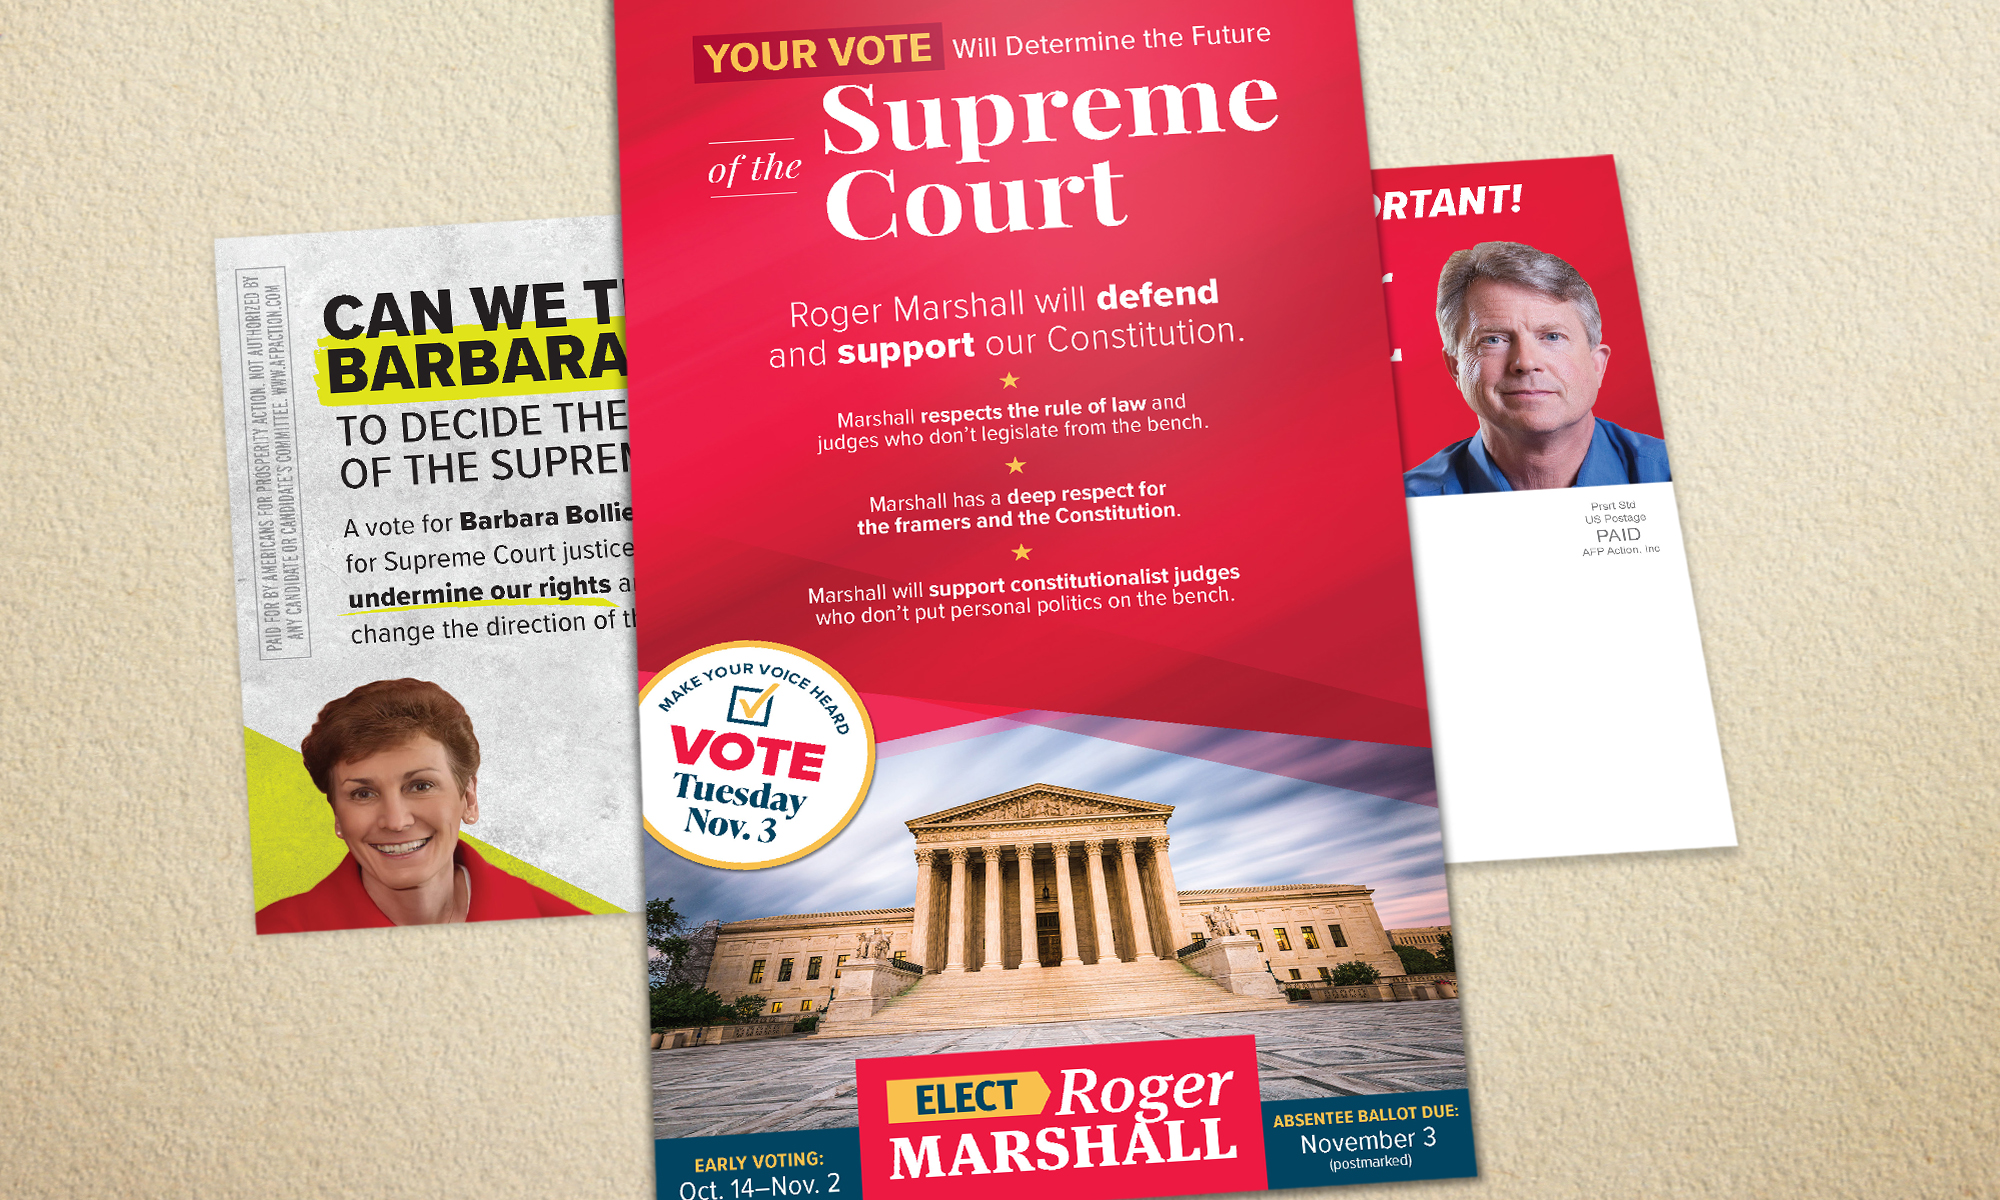 Americans for Prosperity-Kansas direct mail